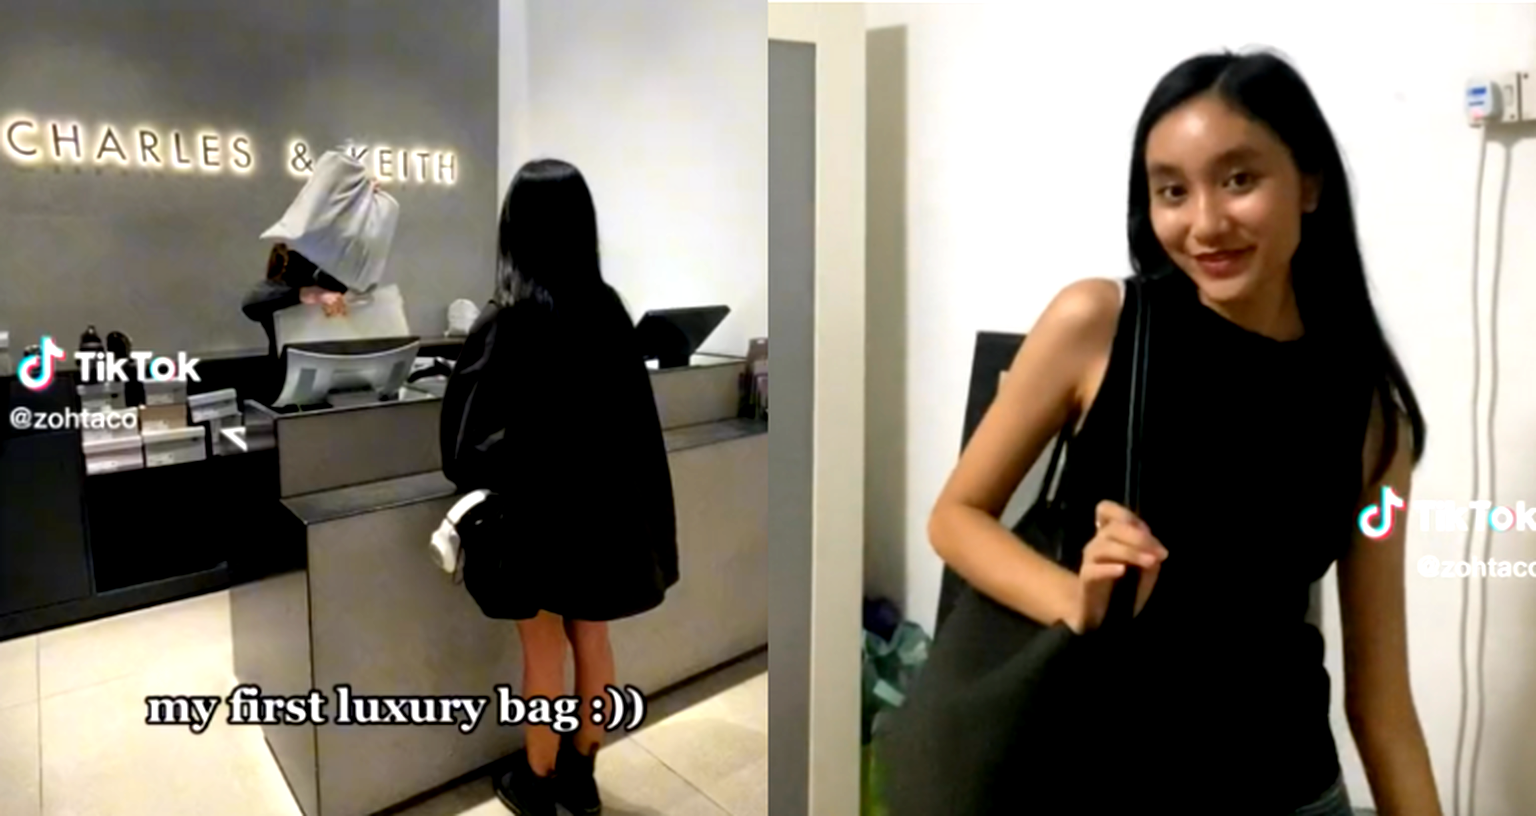 Singapore teen ridiculed for calling $60 bag gifted to her by her father ‘luxury’